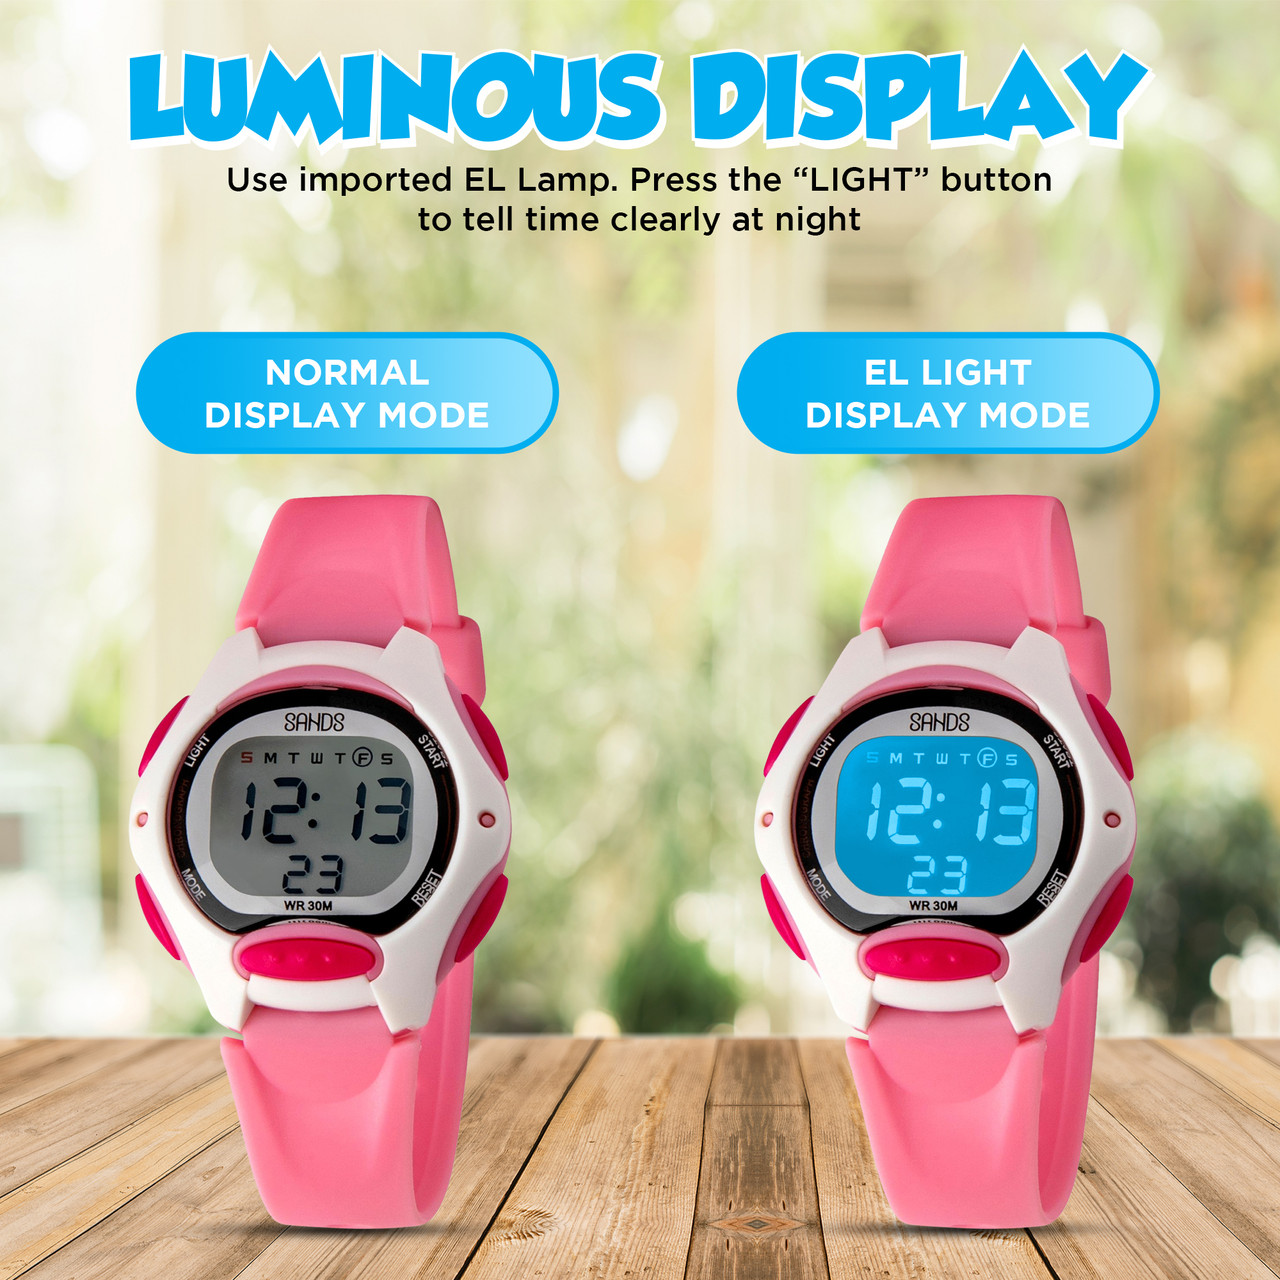 USA Fashion Trend Luminous Graff Hallucination Watch With LED Light Jelly  Silicone, Transparent, Perfect Gift For Couples And Kids From Vipswei,  $4.48 | DHgate.Com